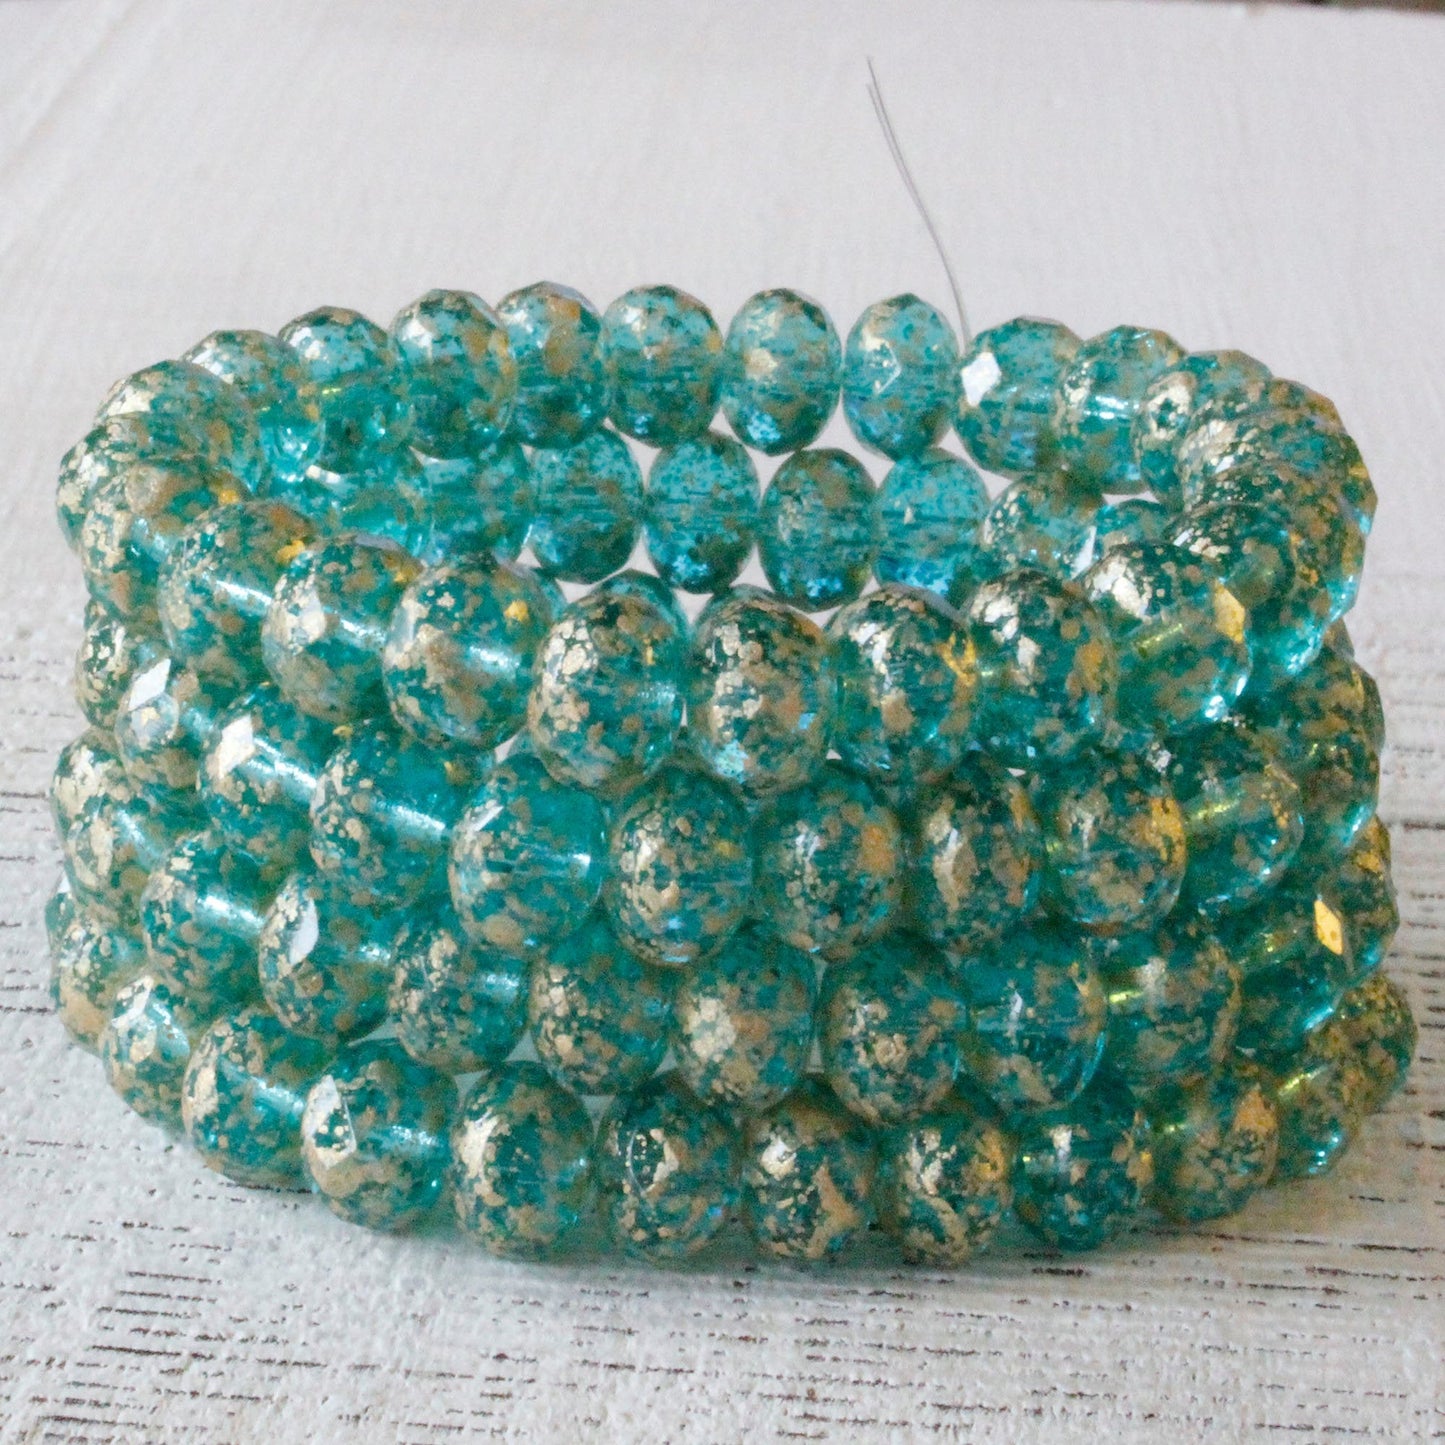 6x9mm Rondelle Beads - Transparent Seafoam with Gold Dust - 25 Beads